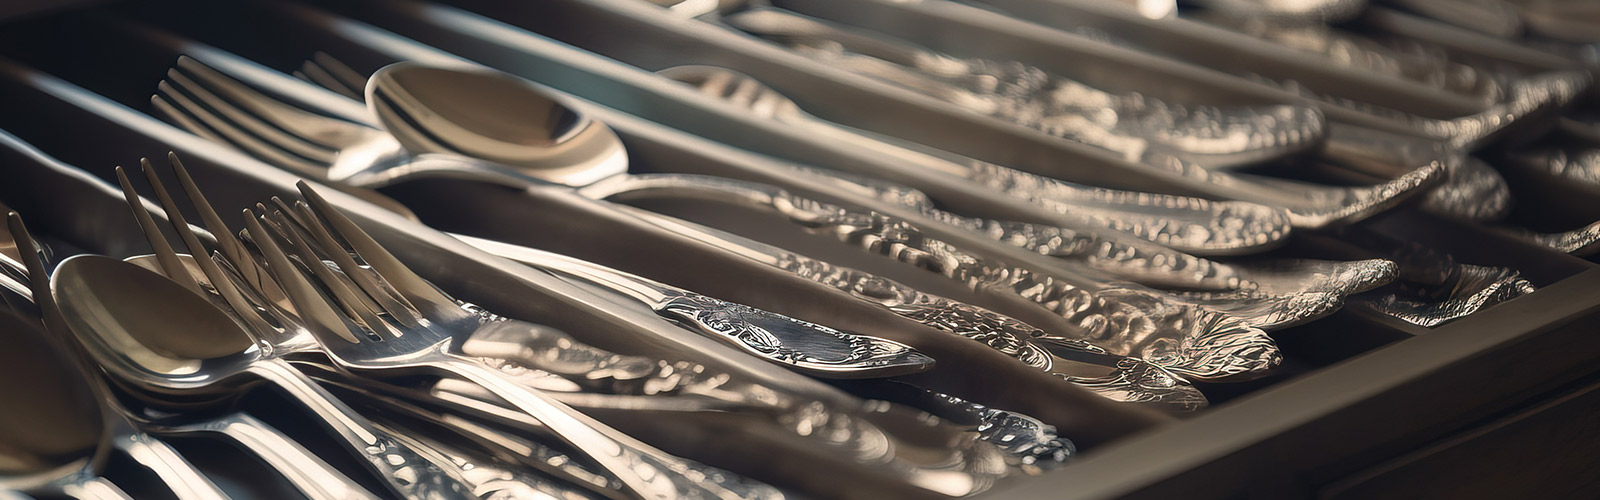 https://www.rewardhospitality.com.au/Images/ContentImages/Stainless-Steel-used-for-Cutlery-cover.jpg